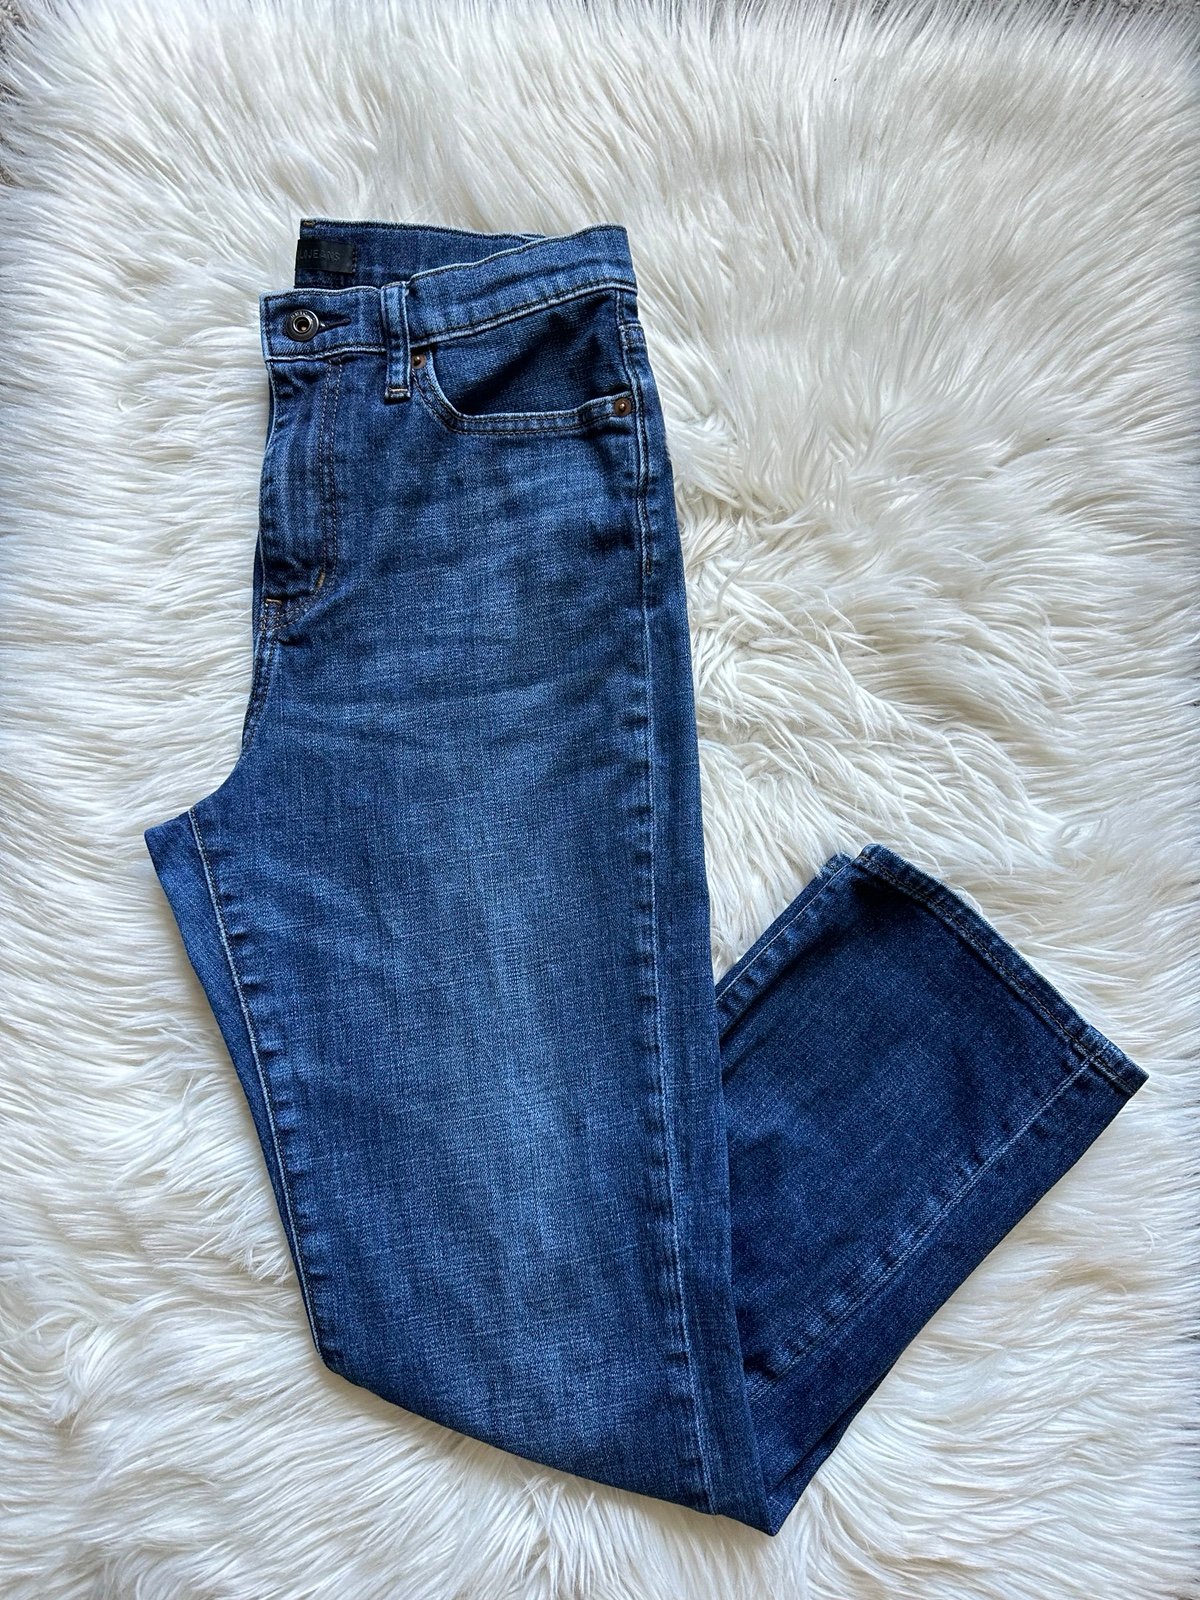 Popular Uniqlo lightweight high rise ankle jeans Jd5Xkp